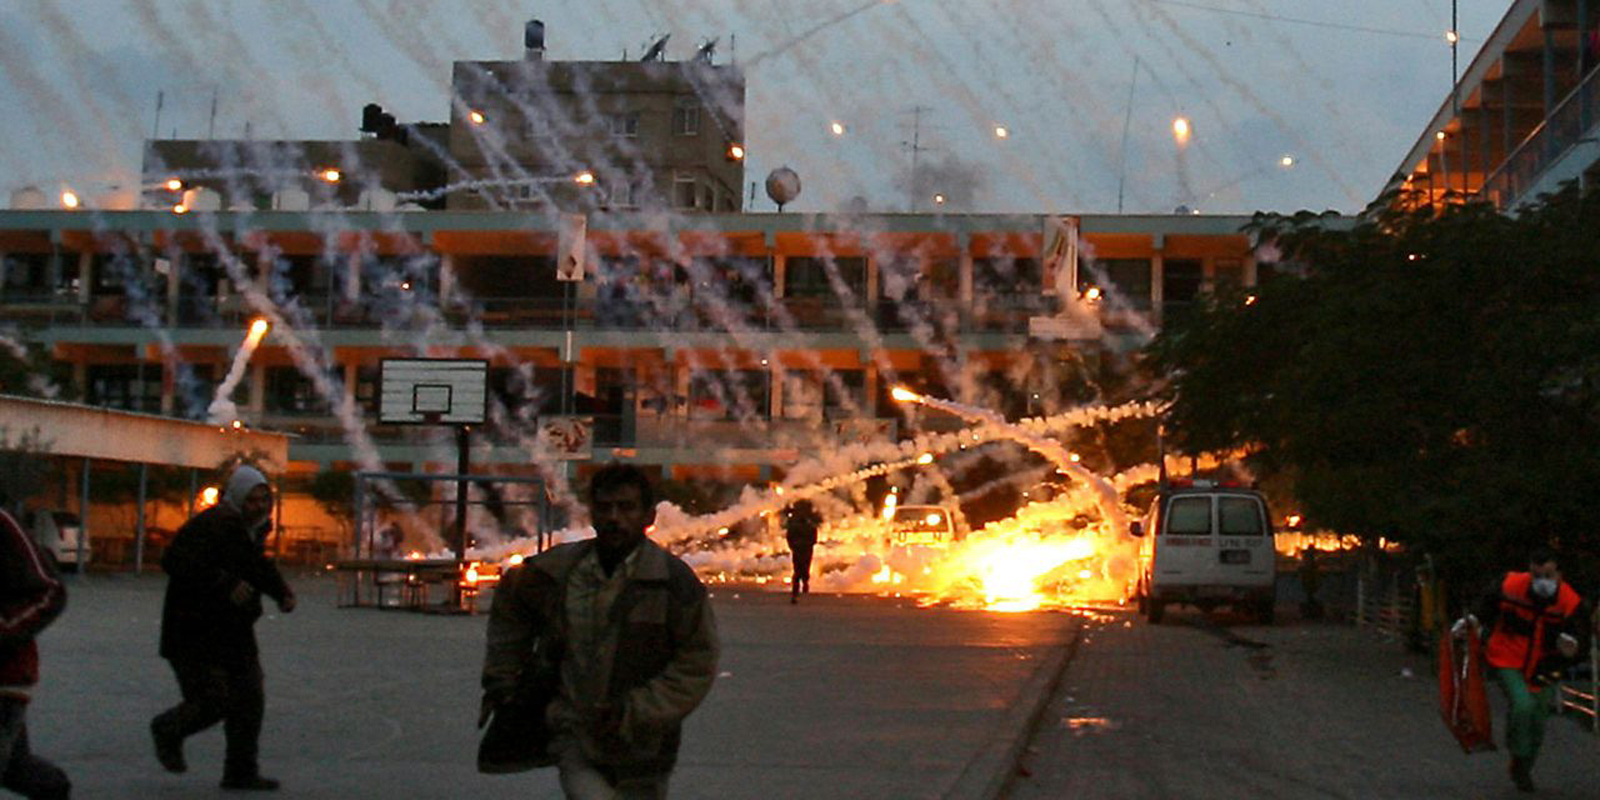 Israeli phosphorus bomb landing during Operation Cast Lead on a school operated by the United Nation Relief and Works Agency for Palestine Refugees in the Middle East, Beit Lahiya, Gaza, 17 January 2009. The use of phosphorus bombs in civilian areas is prohibited by international law. Photo Iyad El-Baba / UNRWA.